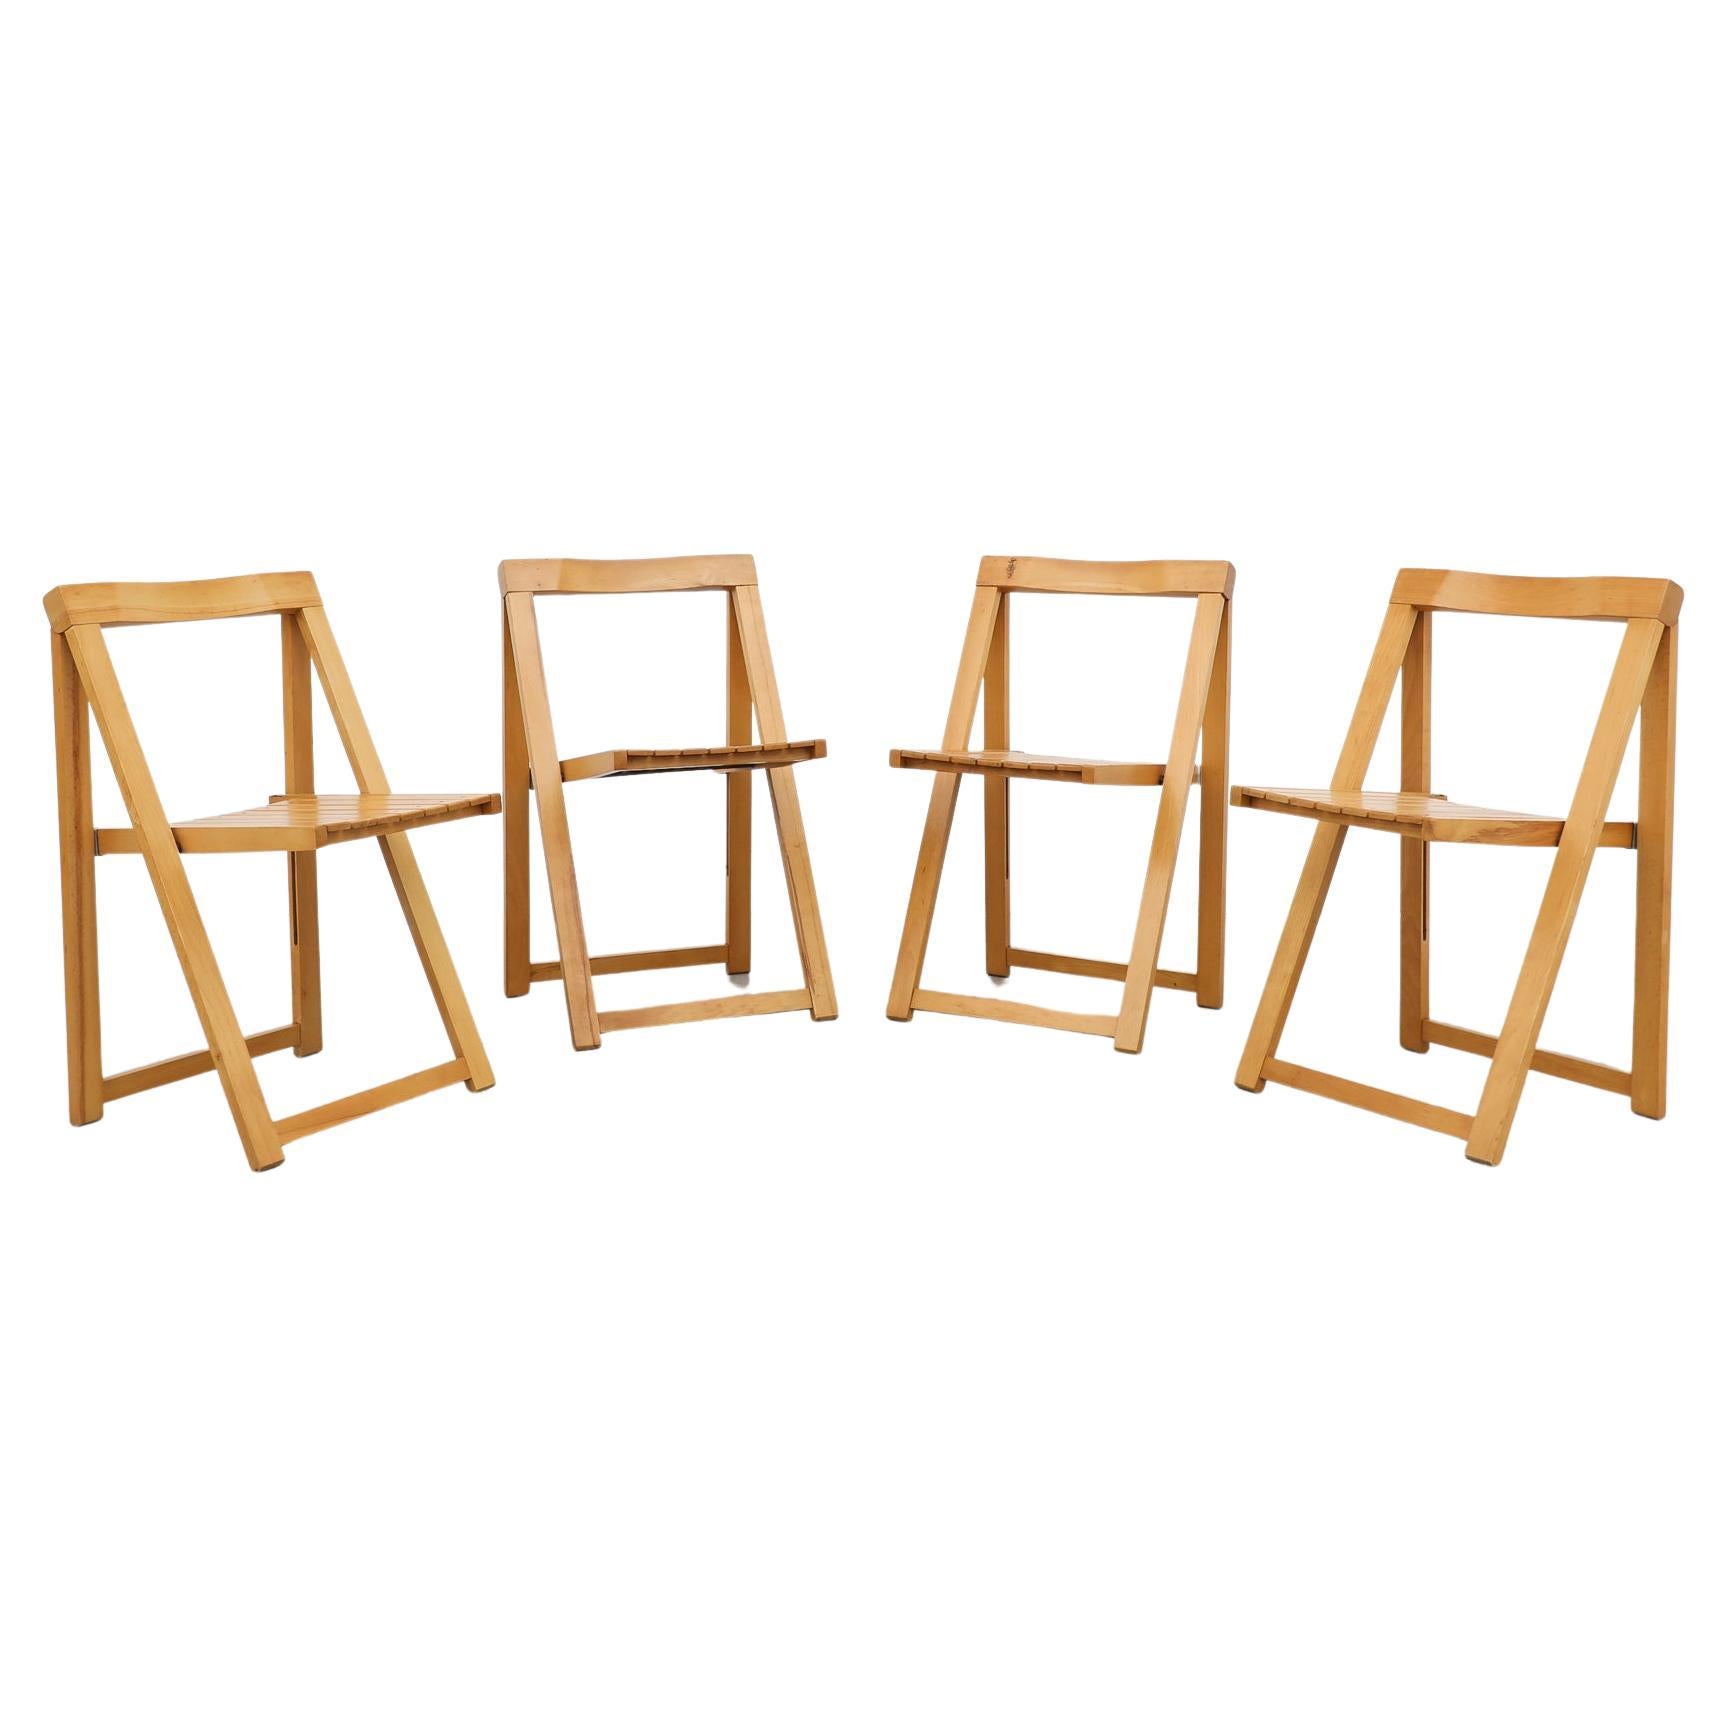 Set of 4 Aldo Jacober Blonde Slatted Wood Folding Chairs for Alberto Bazzini For Sale